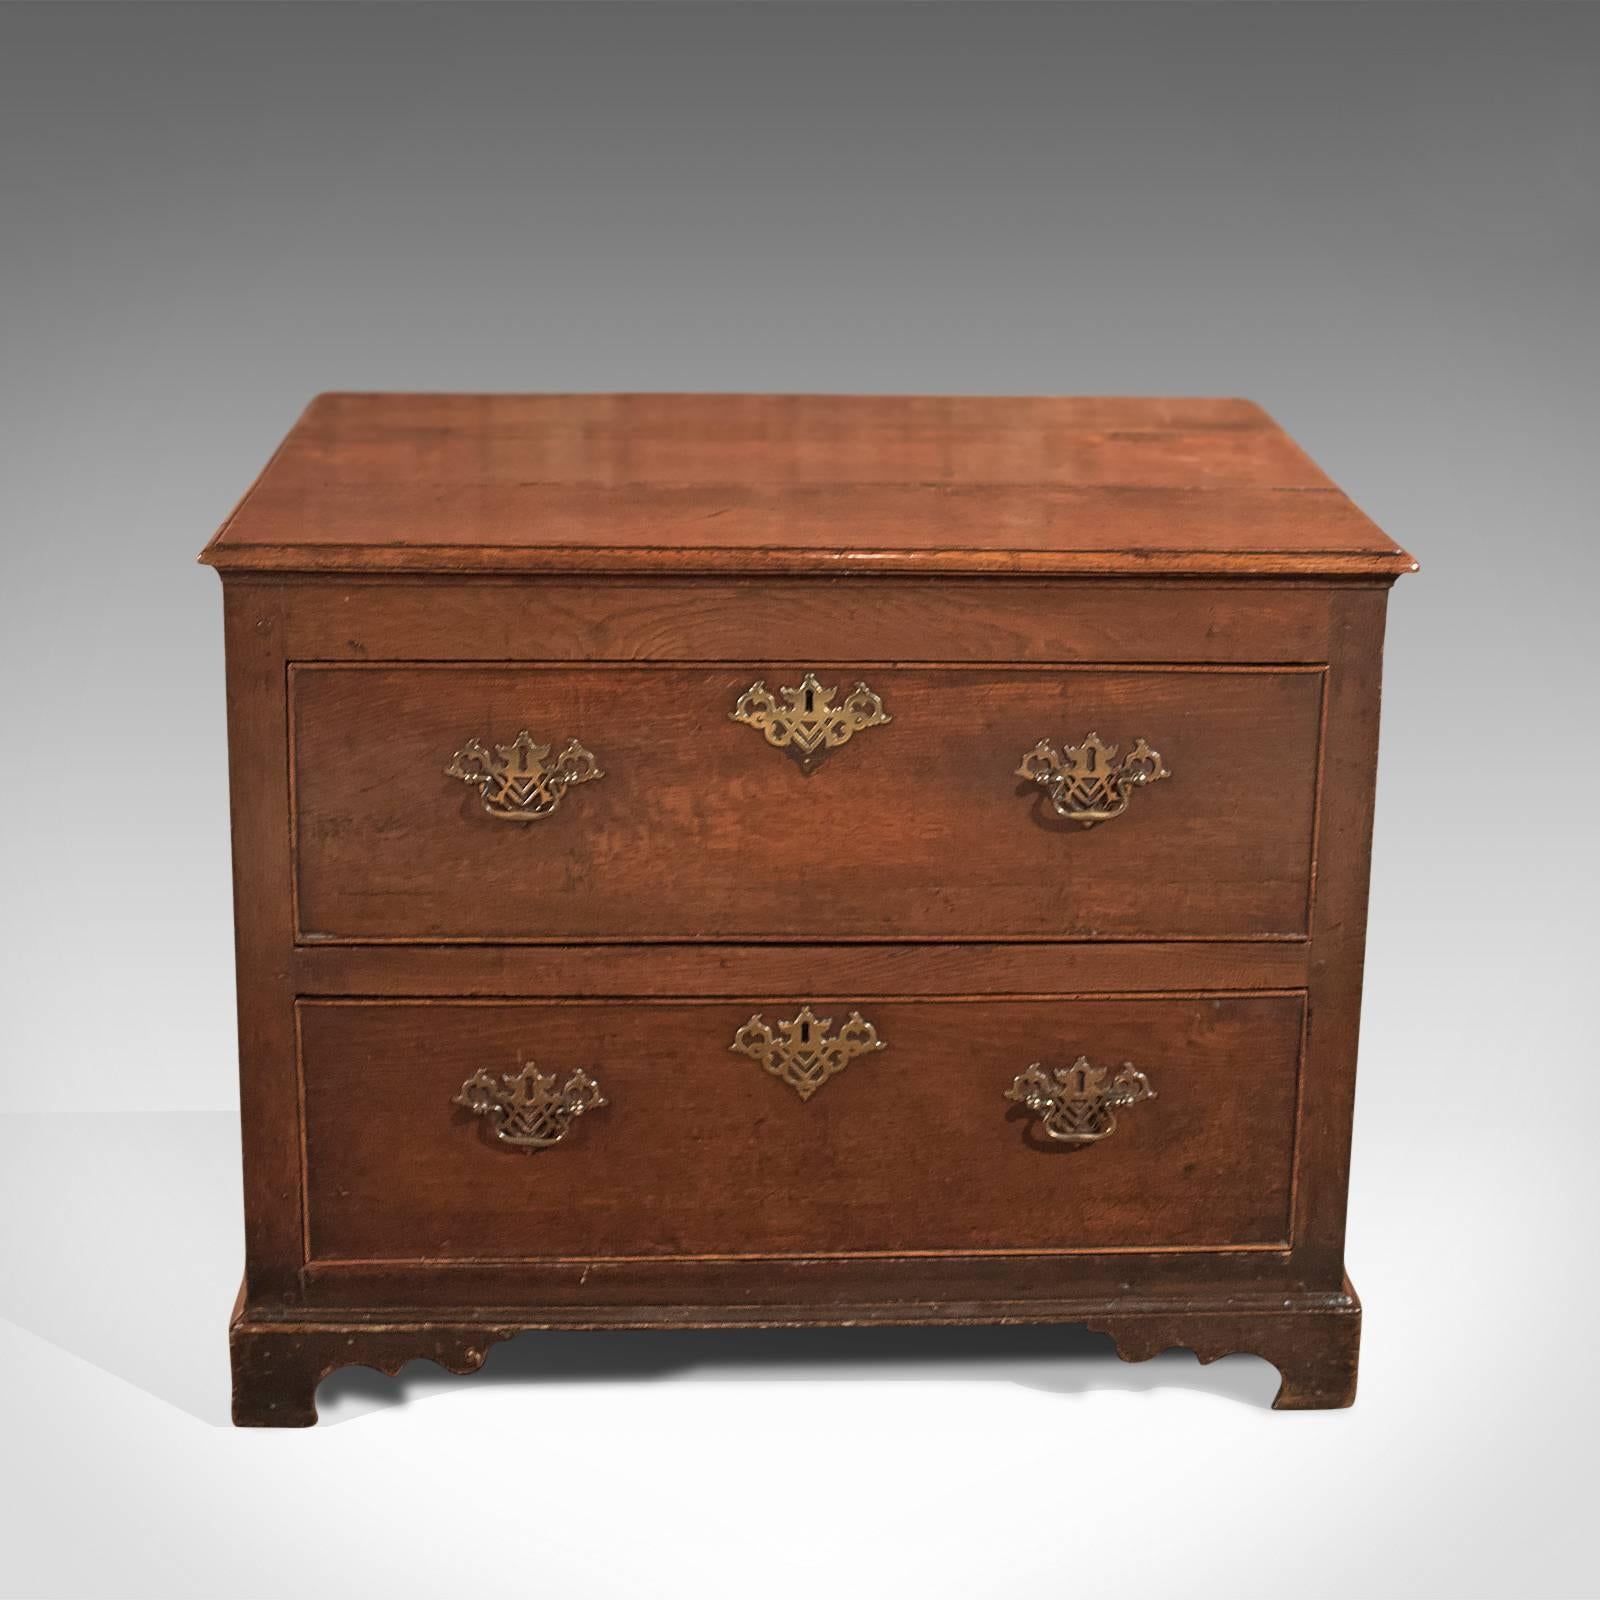 This is a well-proportioned Georgian, antique squat tall boy, chest of drawers dating to circa 1750.

English oak with good colour and grain interest
Three plank top with moulded edge
Raised on typical shaped bracket feet
Field panel sides and